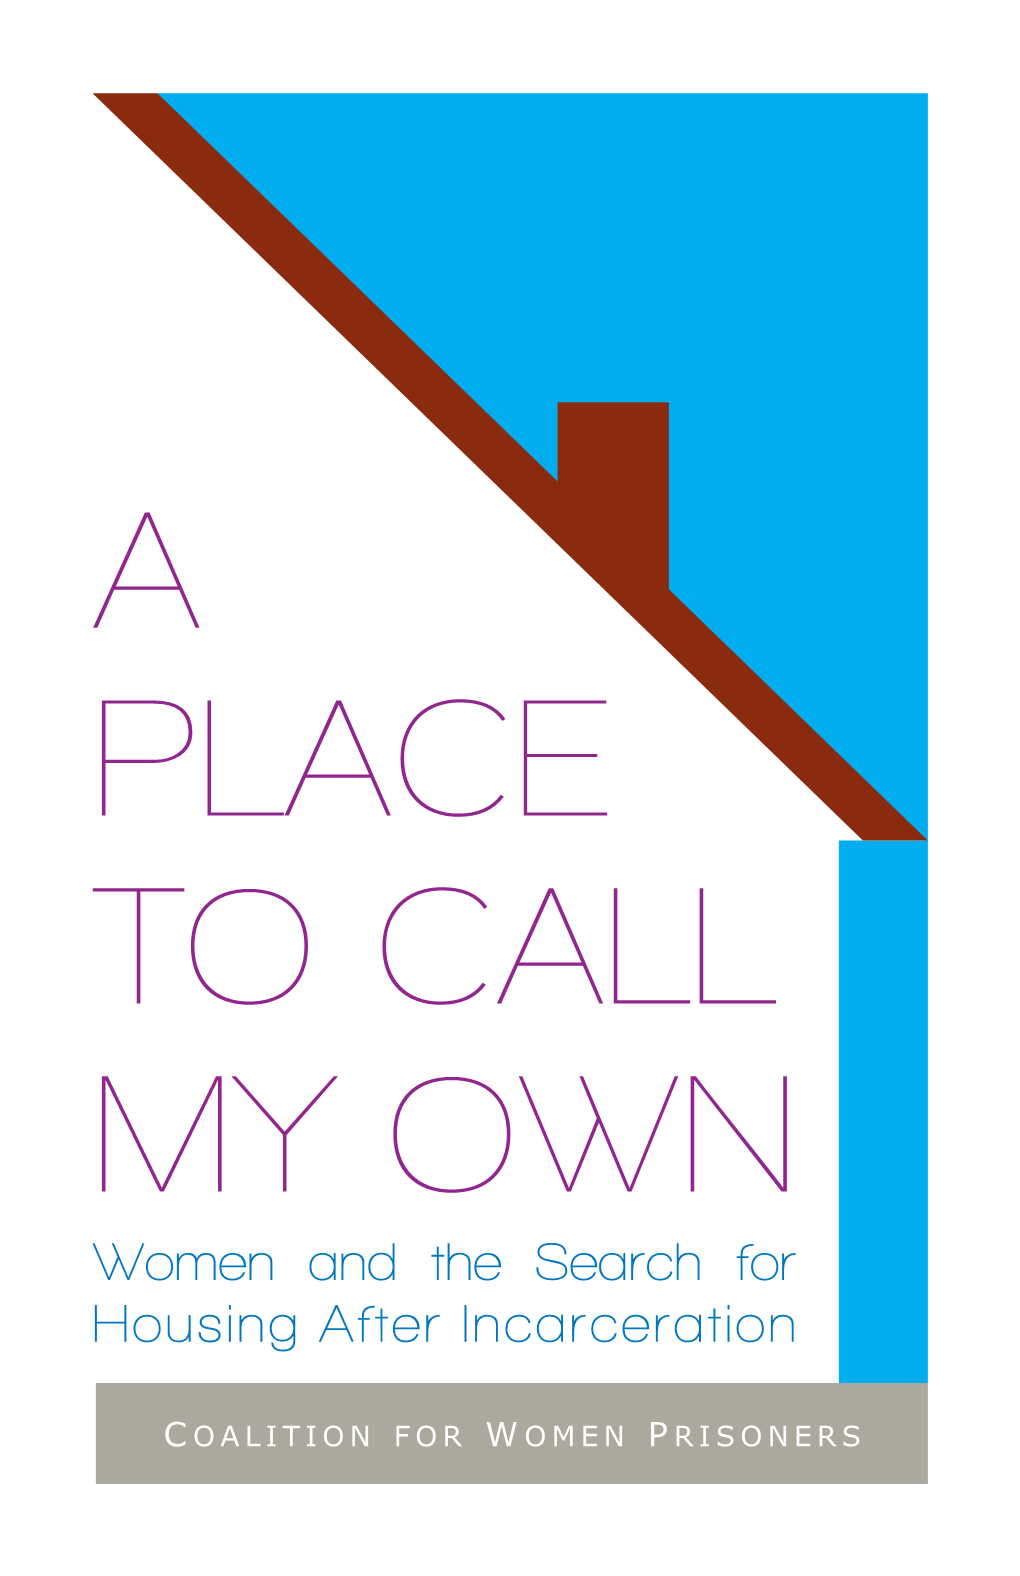 A PLACE to CALL MY OWN Women and the Search for Housing After Incarceration